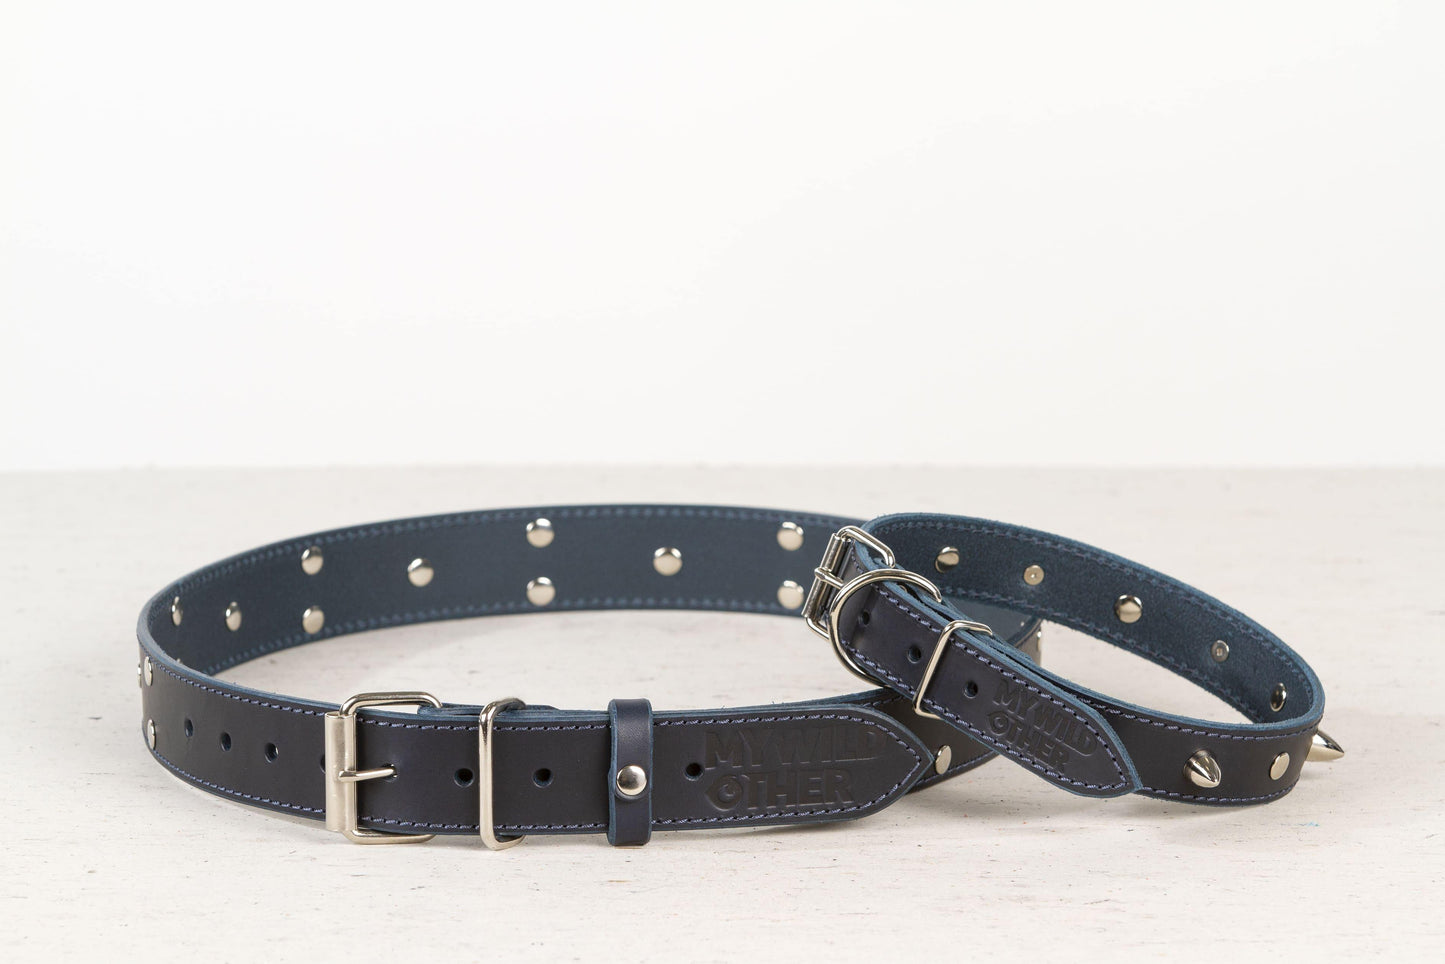 Handmade blue leather STUDDED dog collar - premium dog goods handmade in Europe by My Wild Other